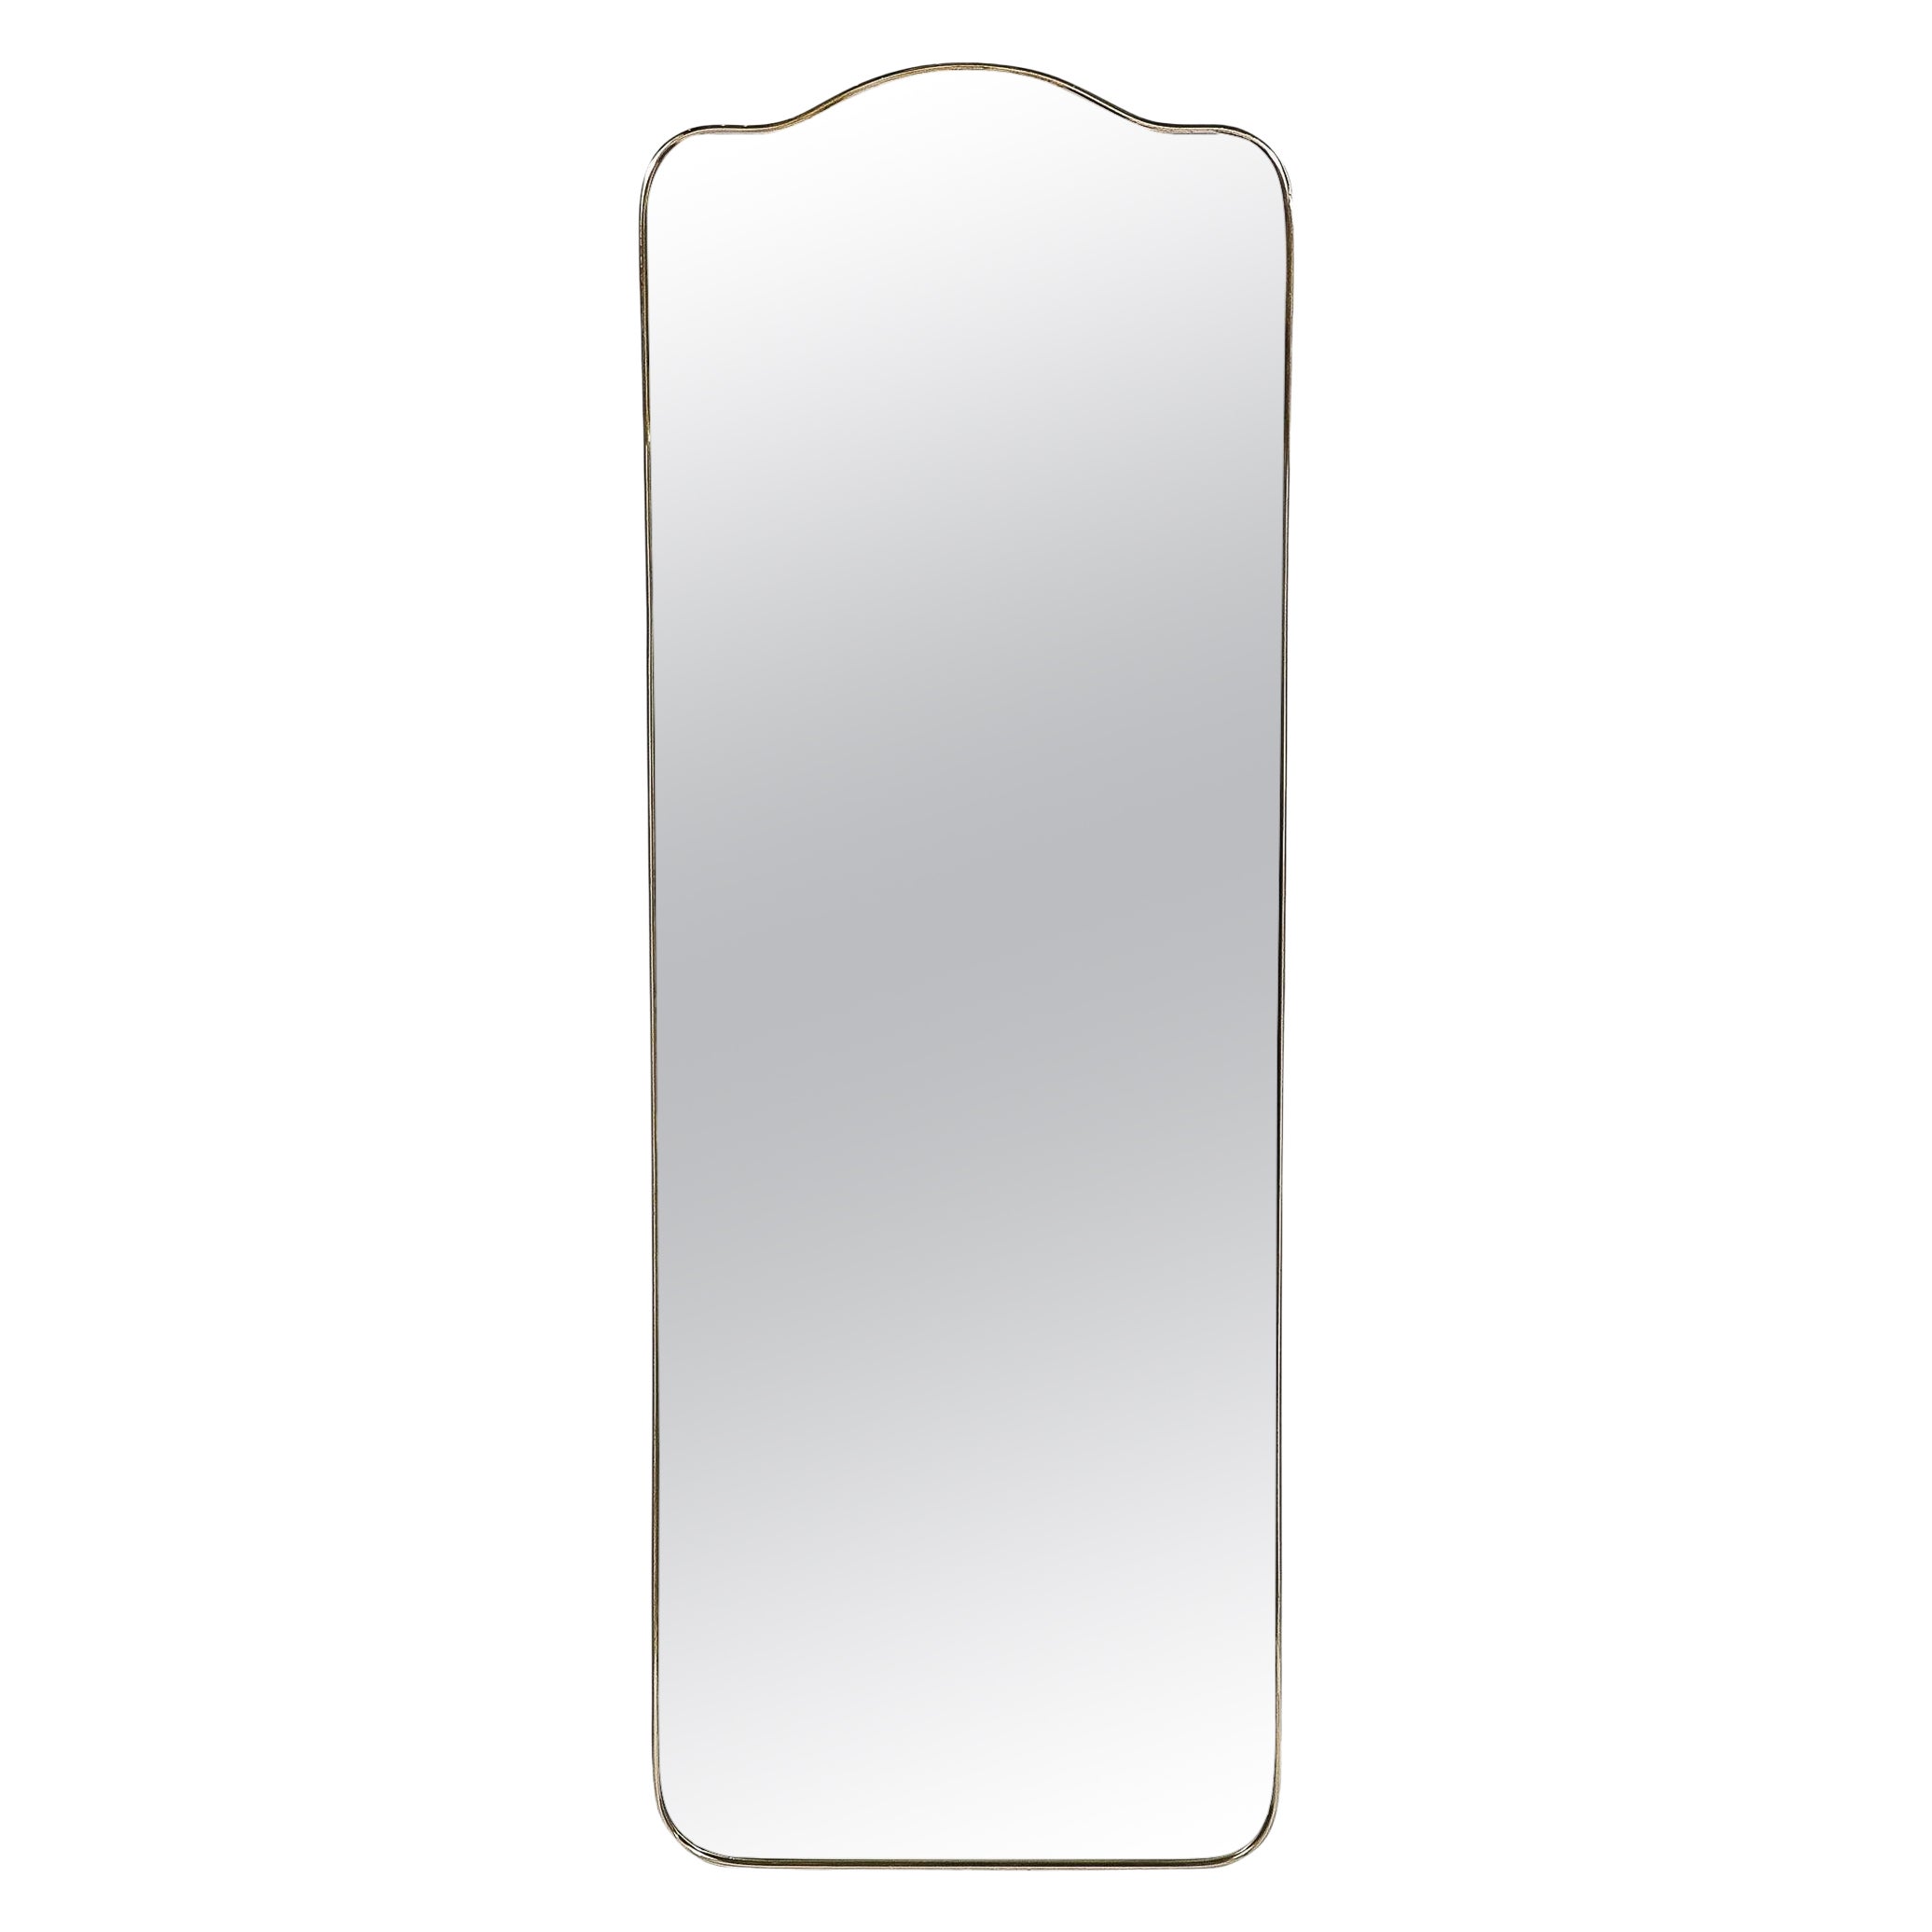 Mid-Century Modernist Vertical Brass Wrapped Mirror With Rounded Arch Detailing